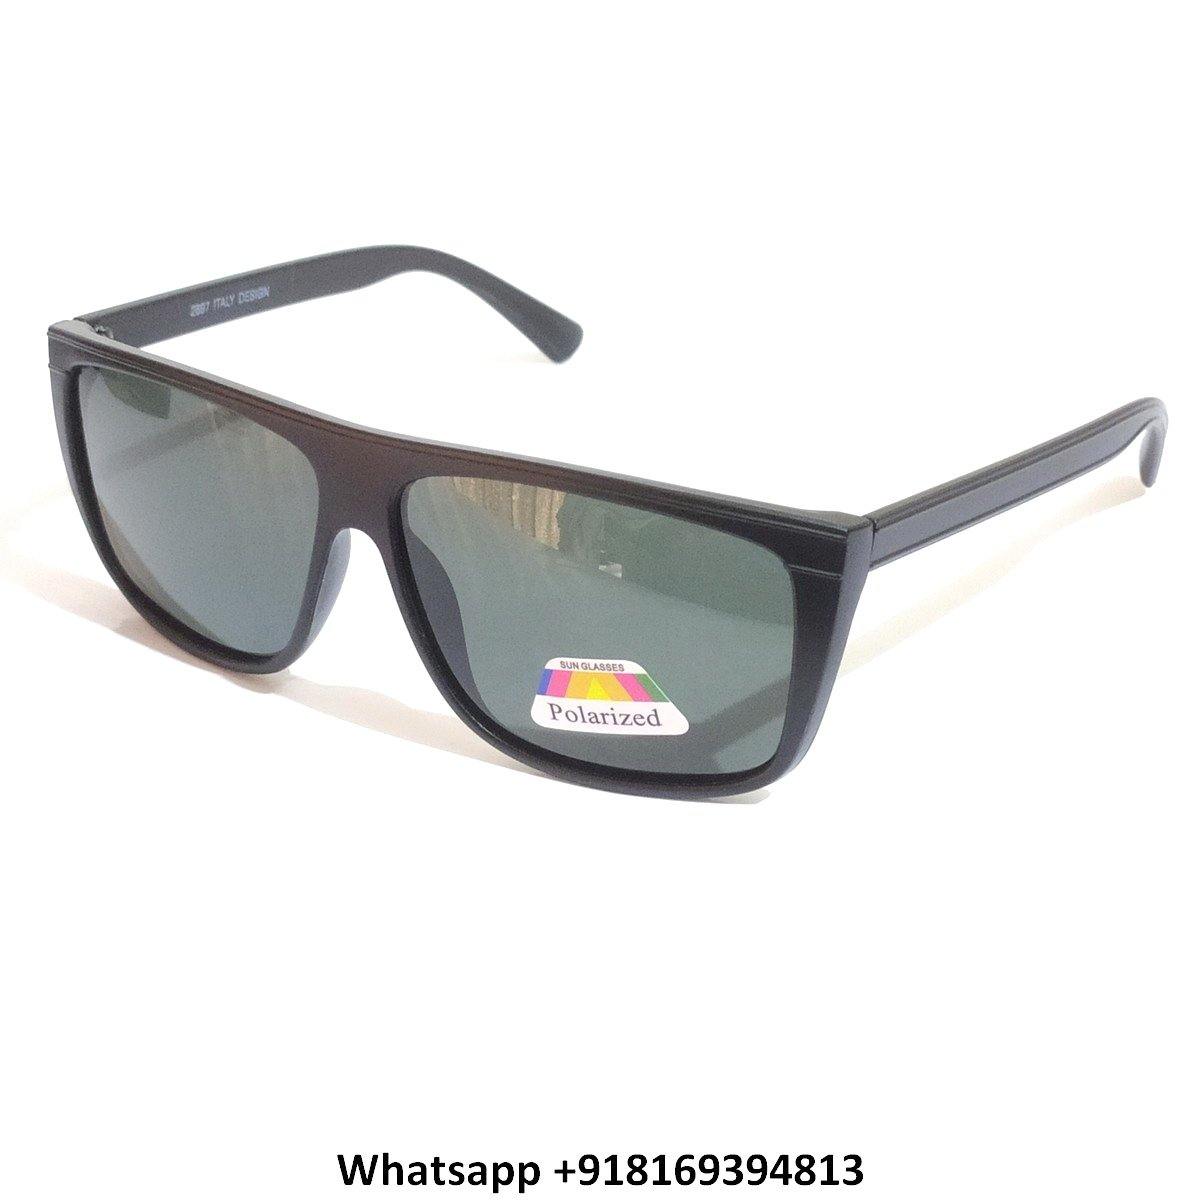 Trendy Square Polarized Sunglasses for Men and Women 2897MBK